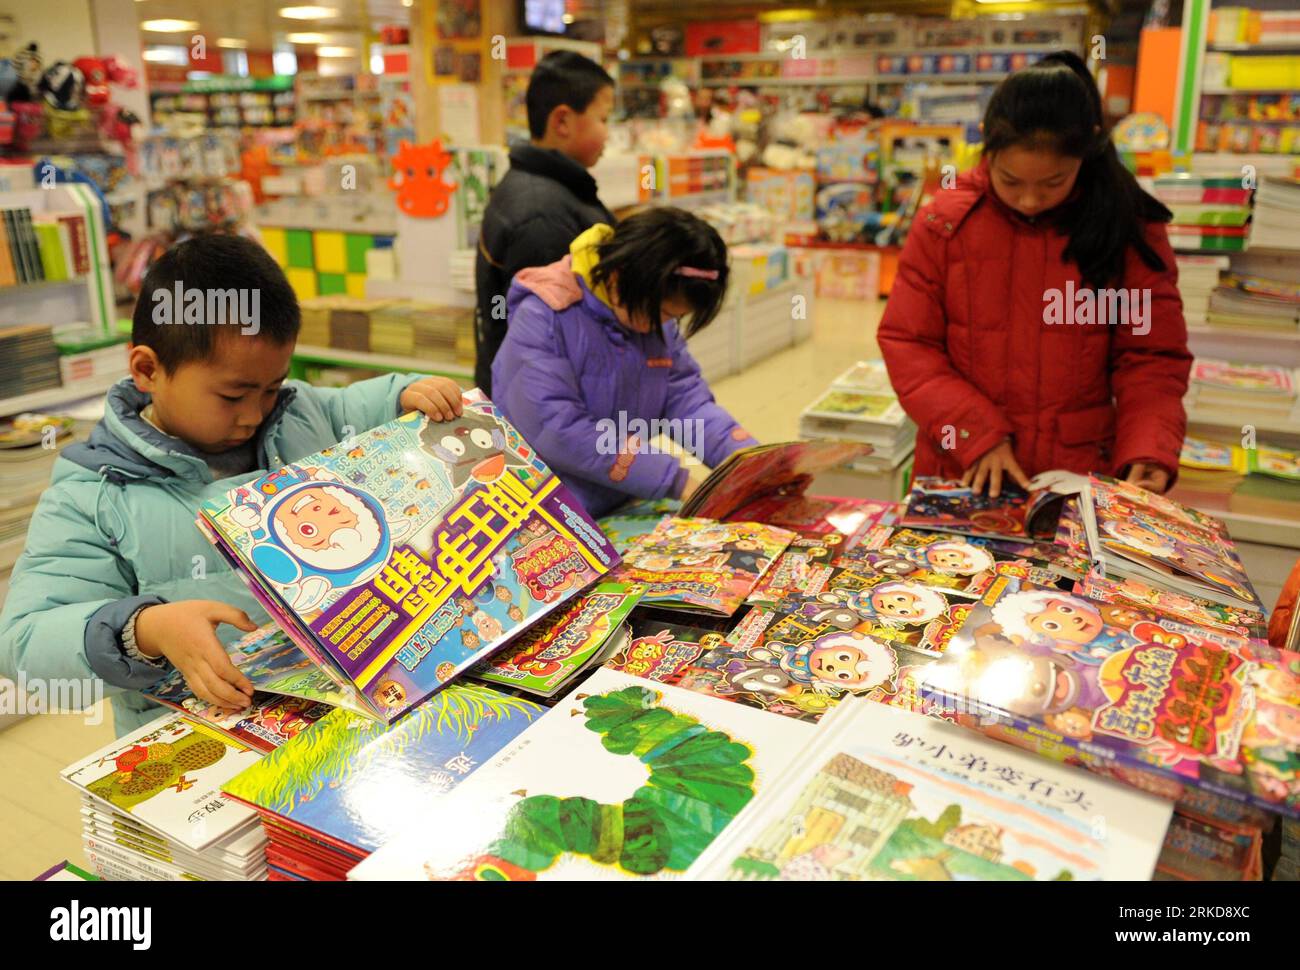 Bildnummer: 54888516  Datum: 08.02.2011  Copyright: imago/Xinhua NANJING, Feb. 8, 2011 (Xinhua) -- Children browse through books at a bookstore in Nanjing, capital of east China s Jiangsu Province, Feb. 8, 2011. Instead of watching TV or going out to temple fairs, more and more Chinese pre-school children and students prefer to spend their Spring Festival holidays in bookstores, public libraries and museums. (Xinhua/Yang Lei) (ljh) CHINA-NANJING-SPRING FESTIVAL-BOOKSTORE (CN) PUBLICATIONxNOTxINxCHN Gesellschaft kbdig xub 2011 quer o0 Buchhandlung Einzelhandel    Bildnummer 54888516 Date 08 02 Stock Photo